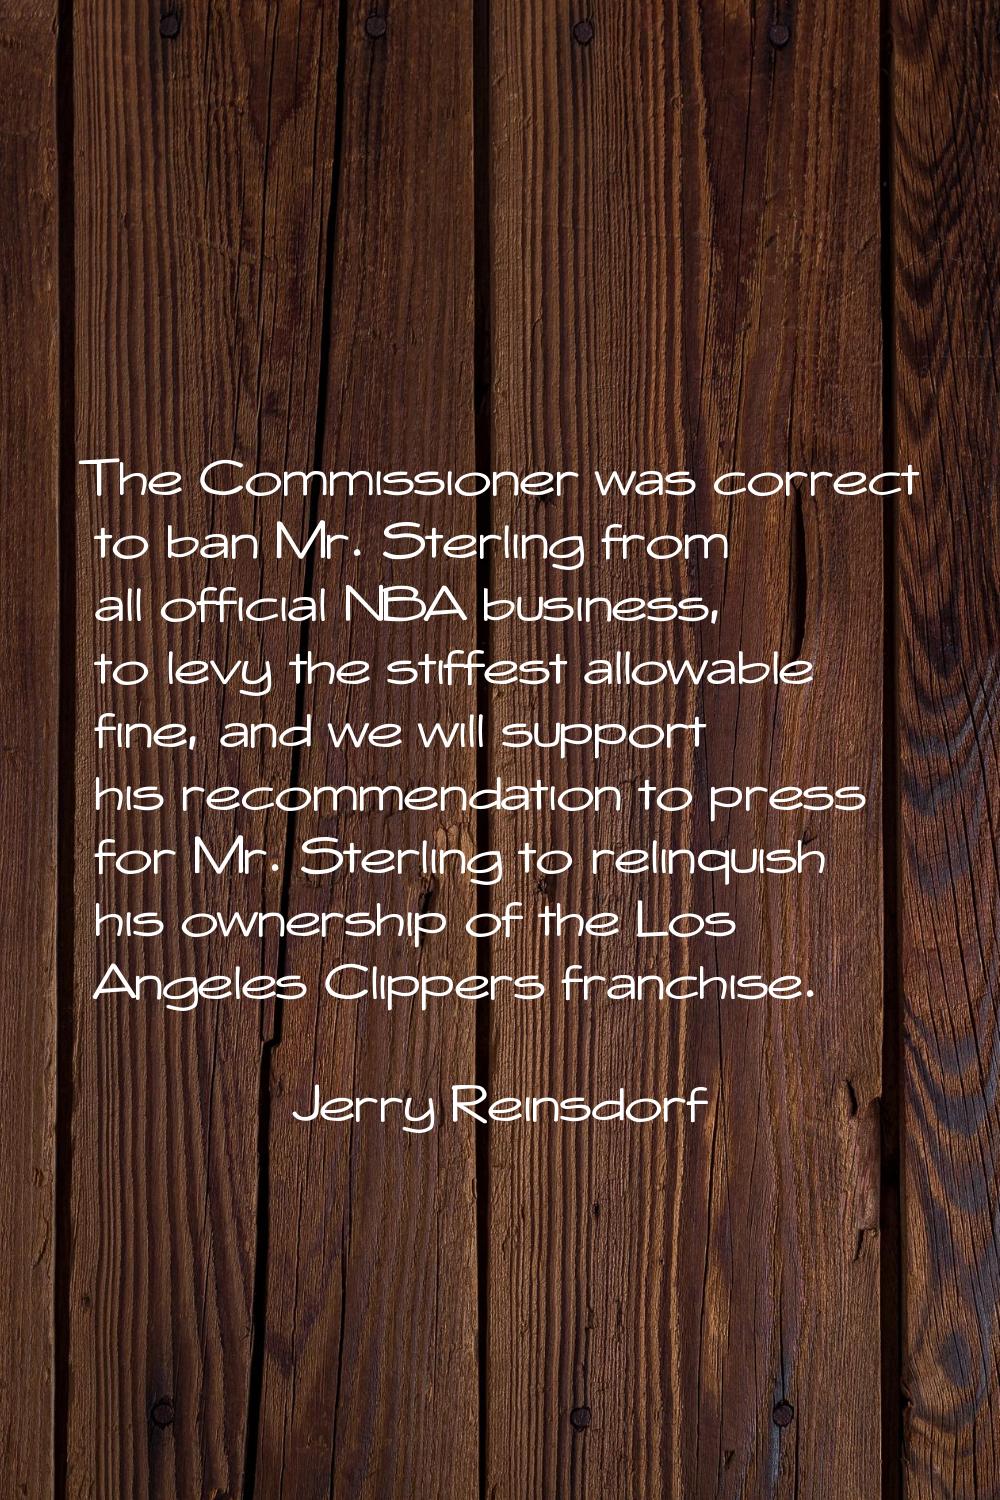 The Commissioner was correct to ban Mr. Sterling from all official NBA business, to levy the stiffe